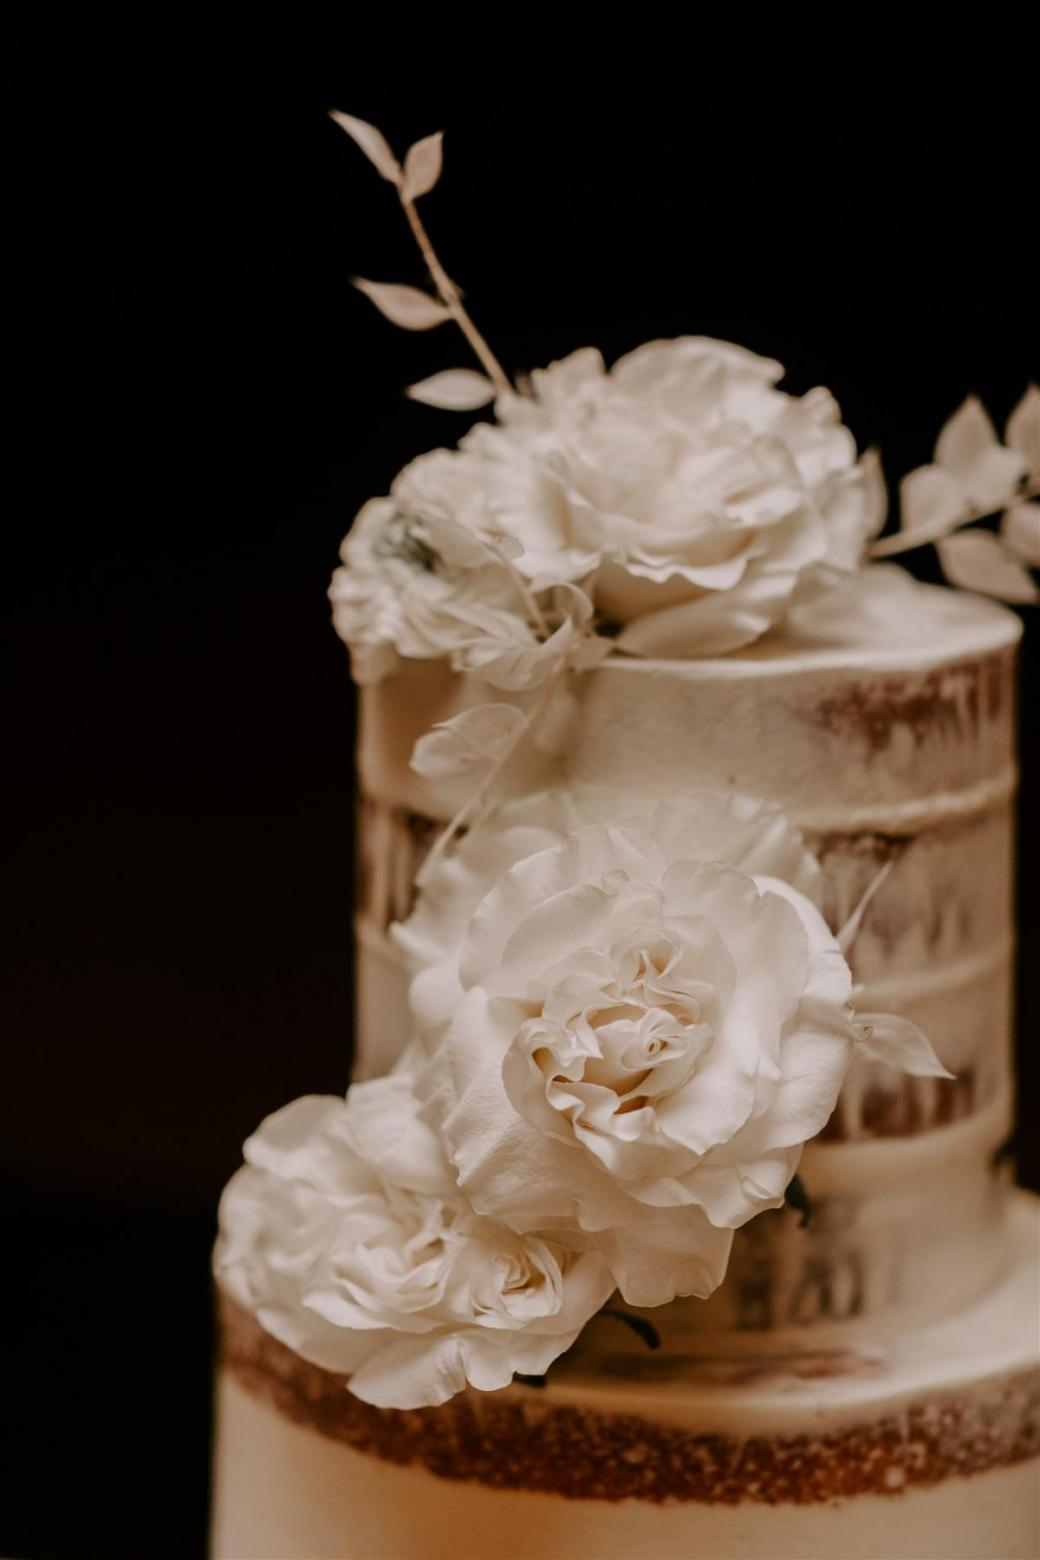 KWH bride Jemma's wedding cake with white florals details